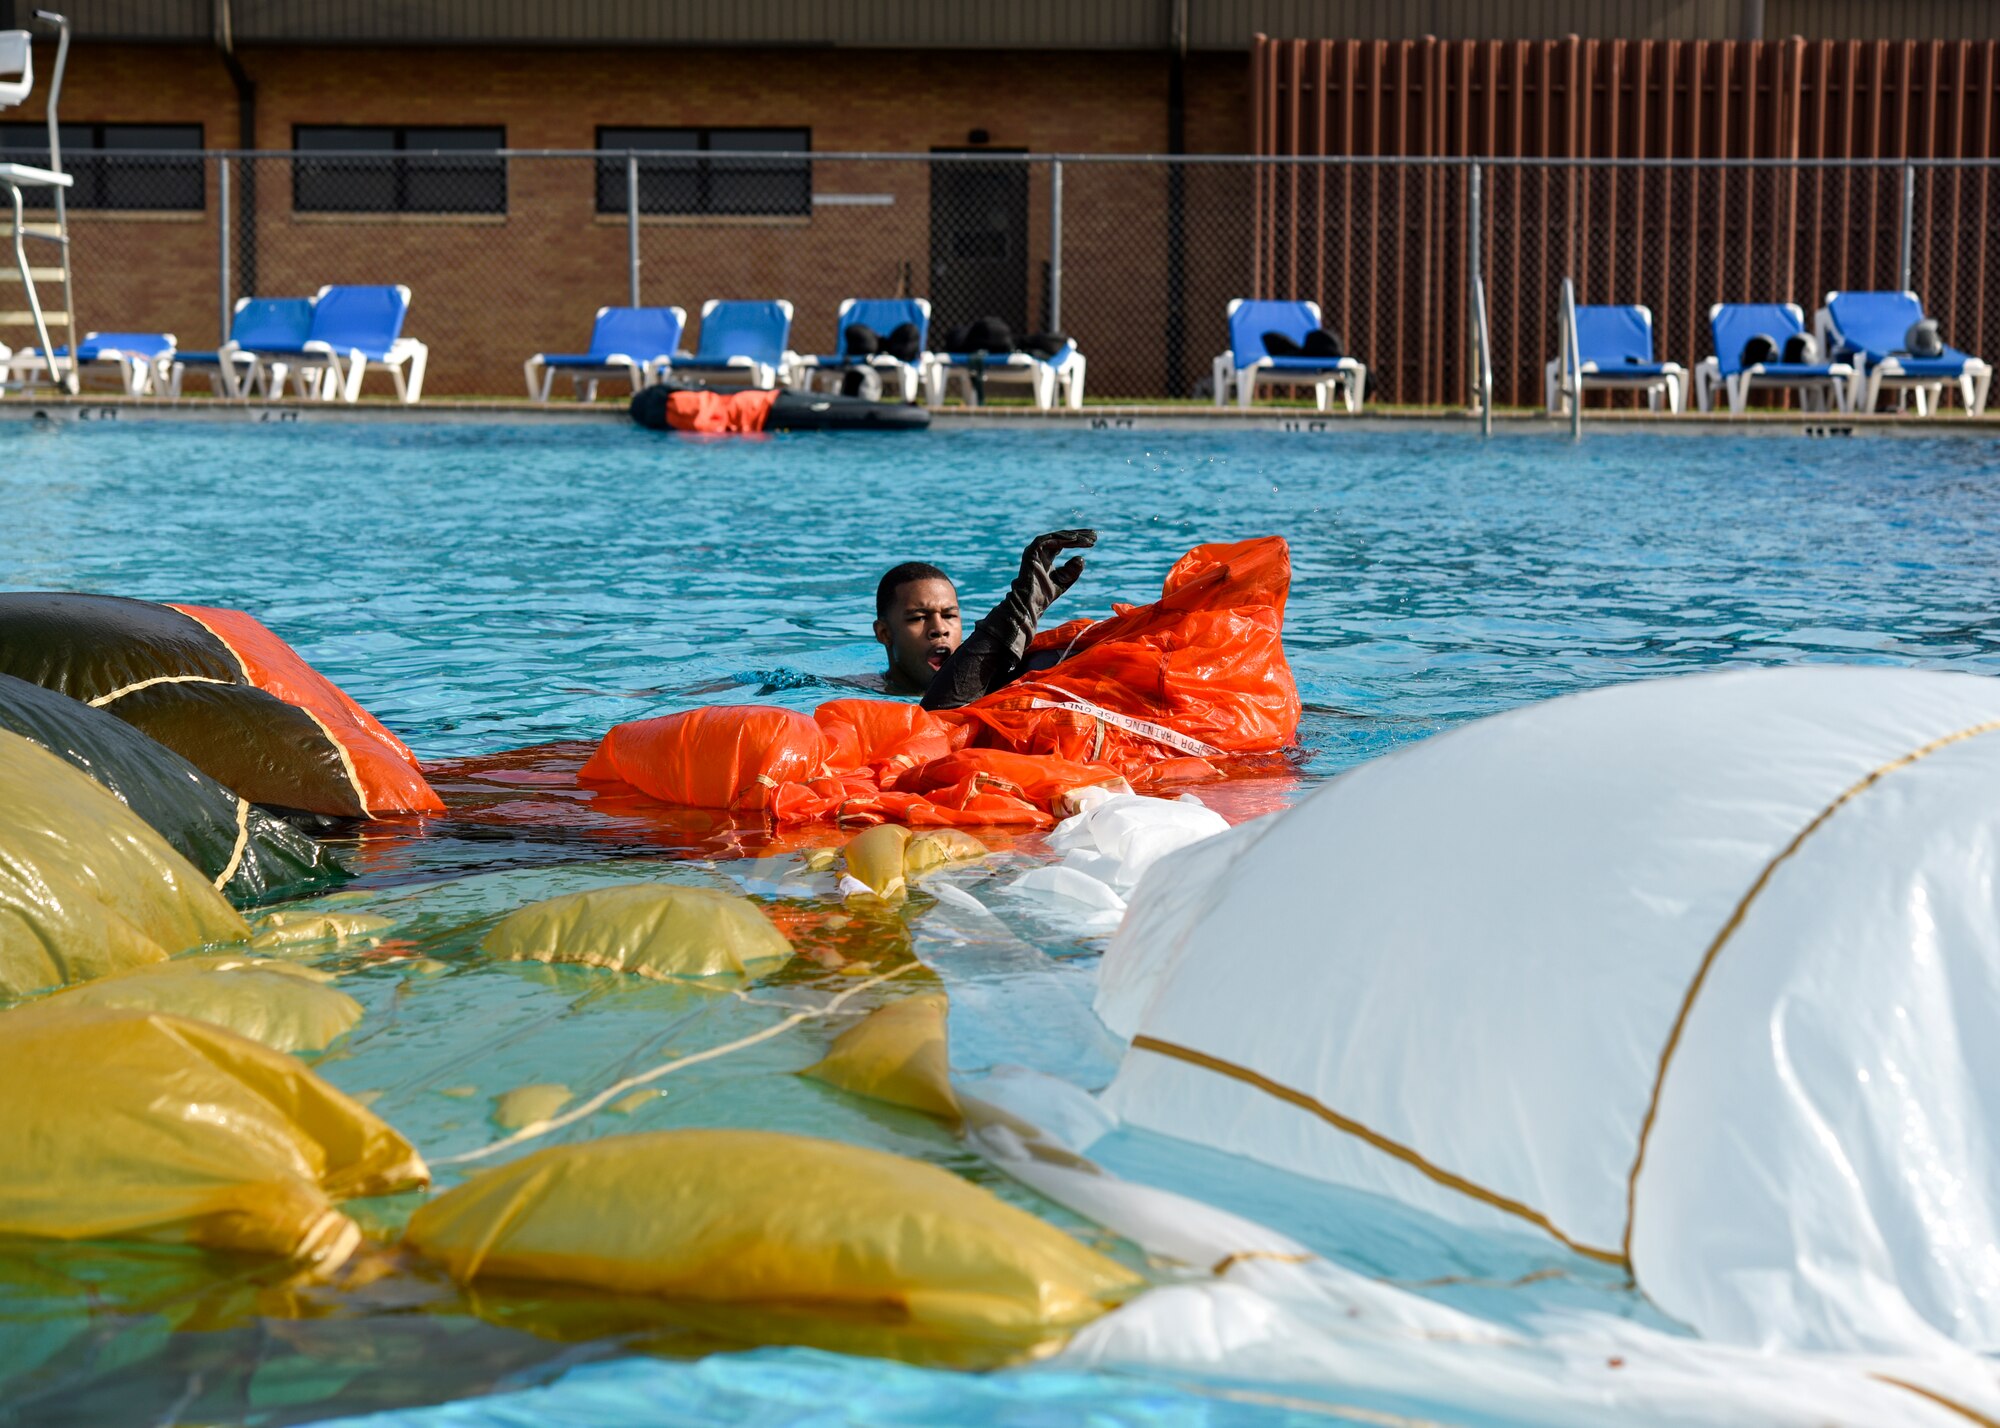 An airman gasps for air as they escape the parachute, during the exercise where a parachute is engulfed over the pilot in the water survival emergency training.